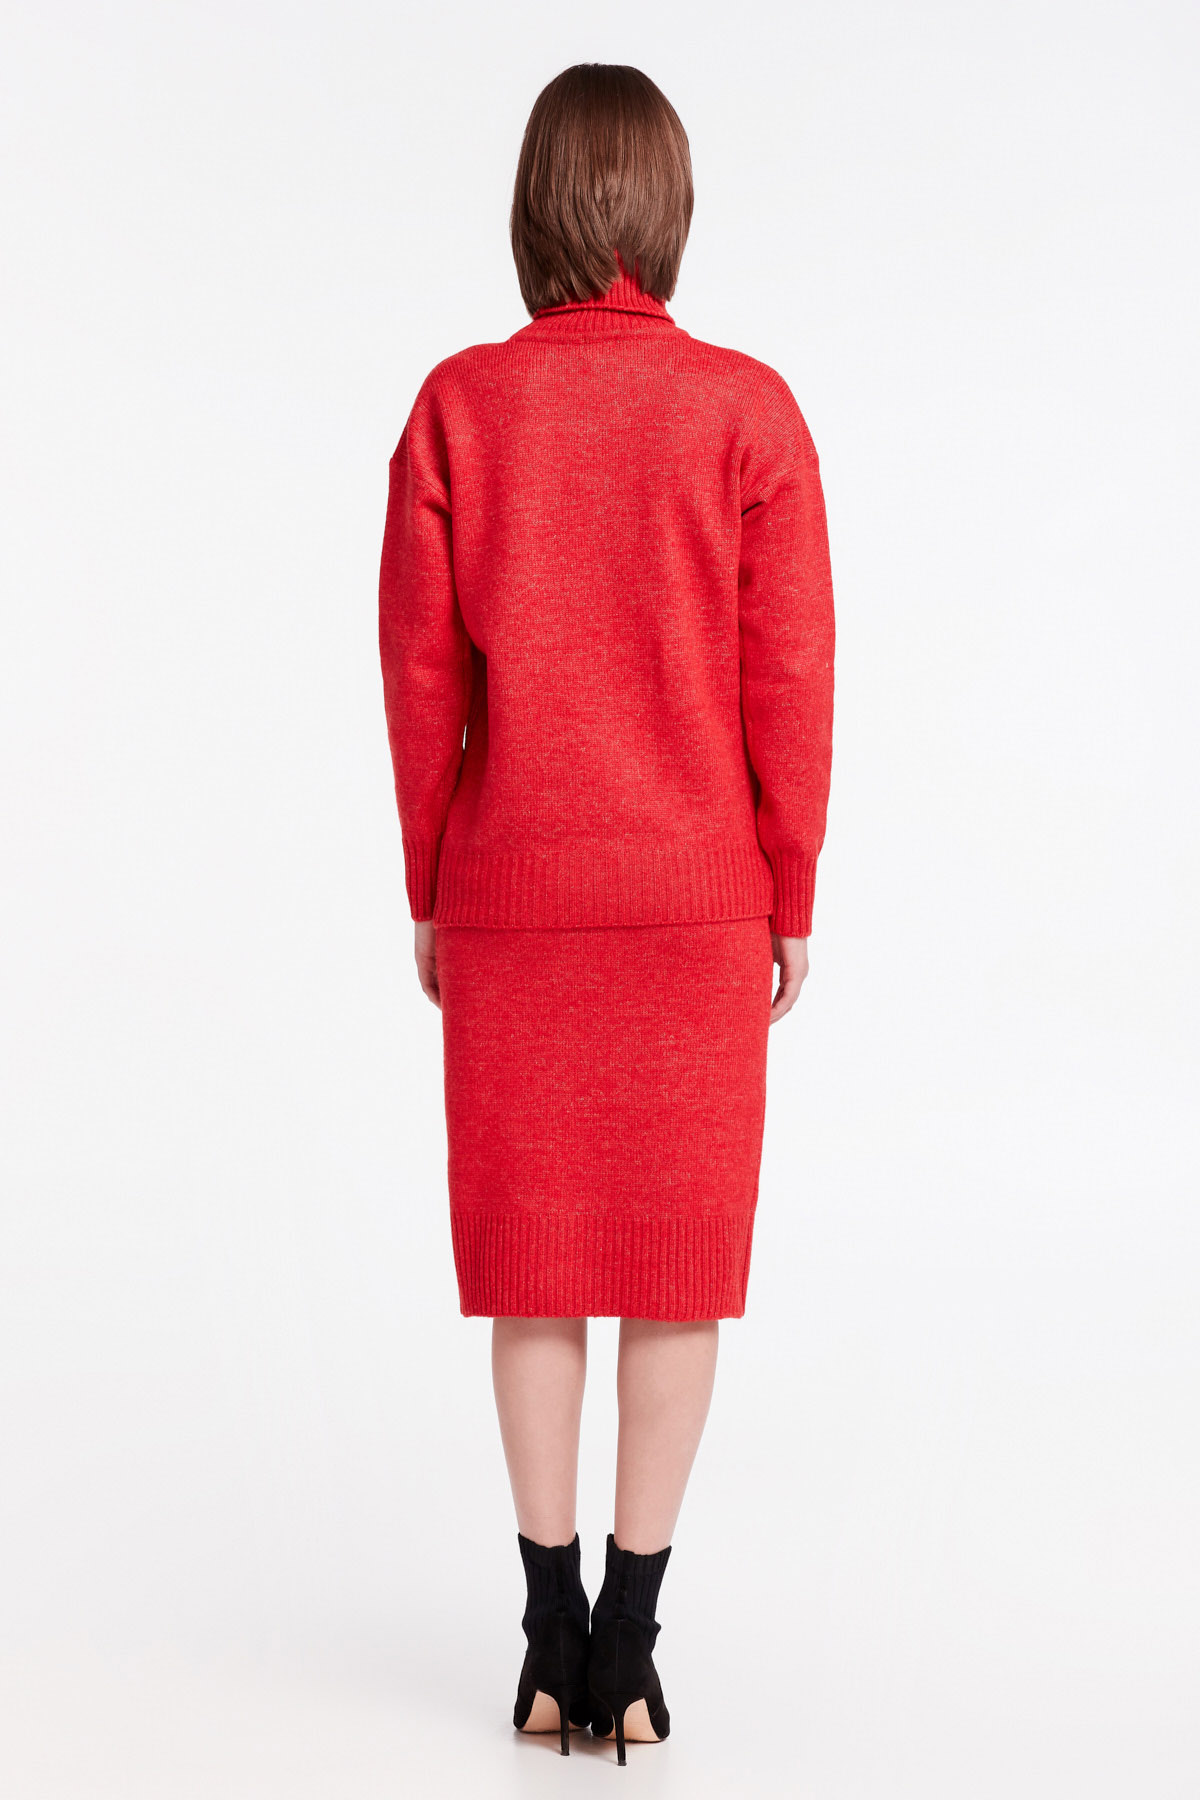 Red knit sweater, photo 5